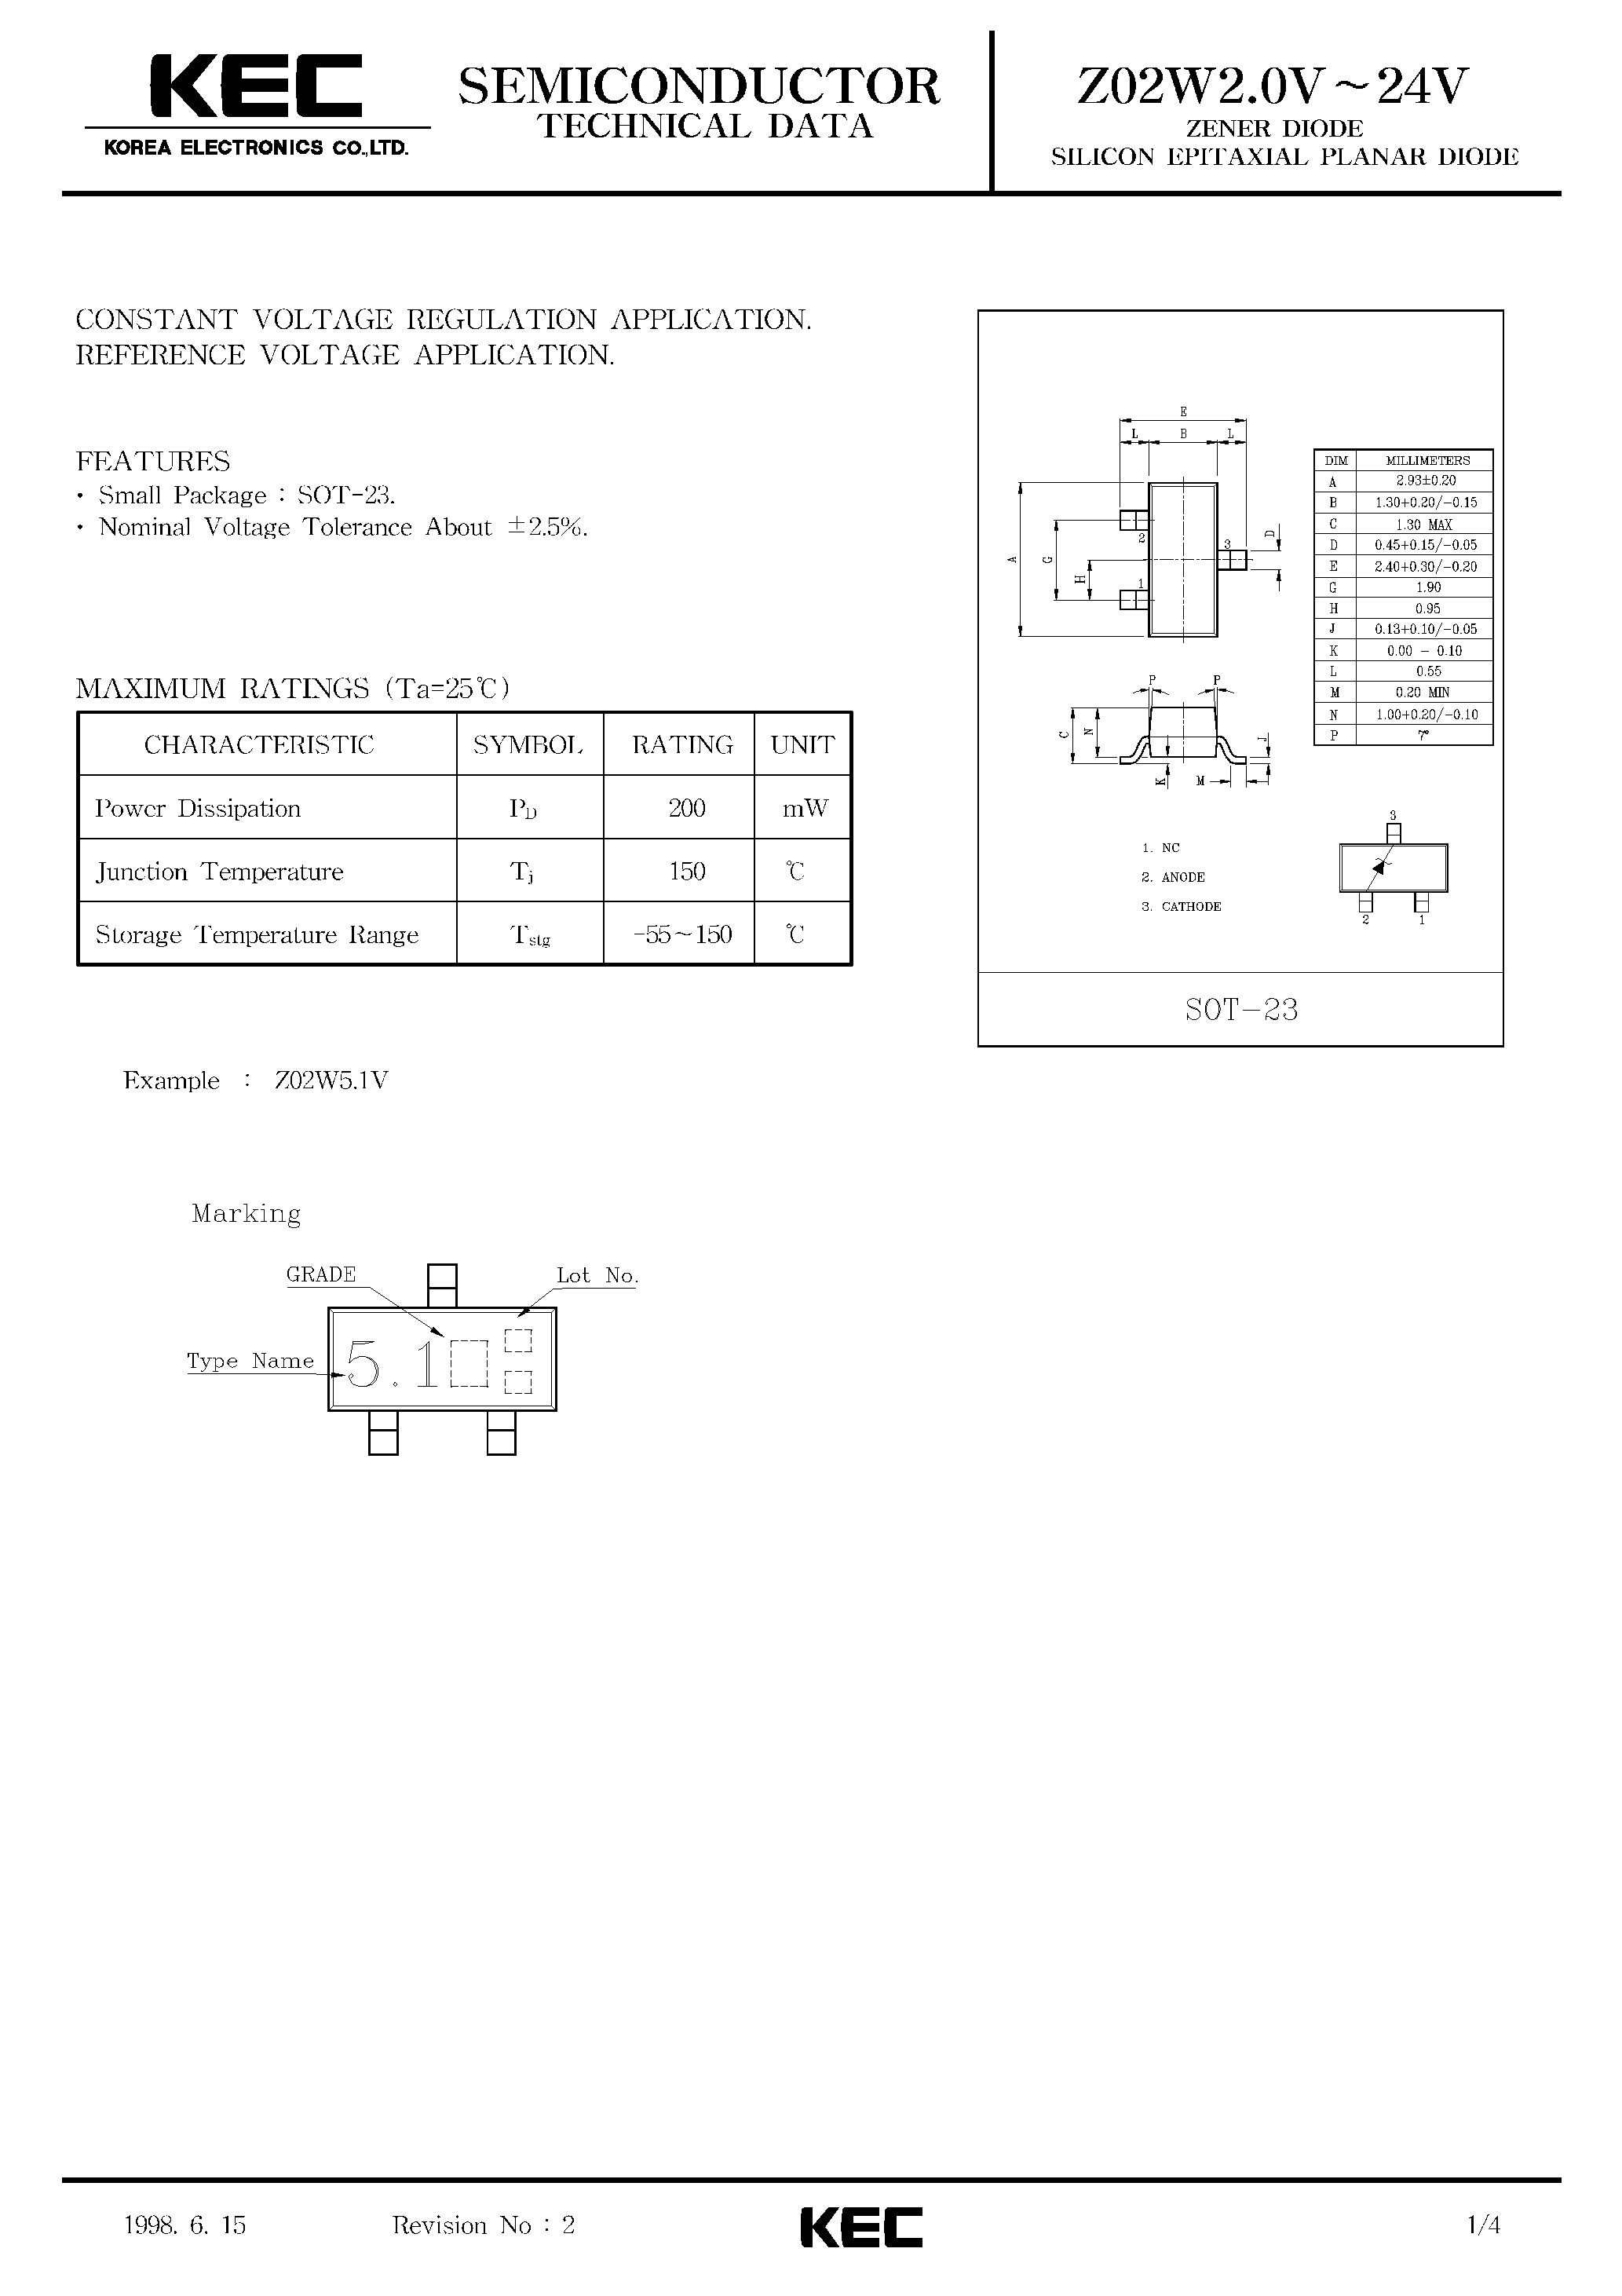 Datasheet Z02W2.7V - ZENER DIODE SILICON EPITAXIAL PLANAR DIODE page 1